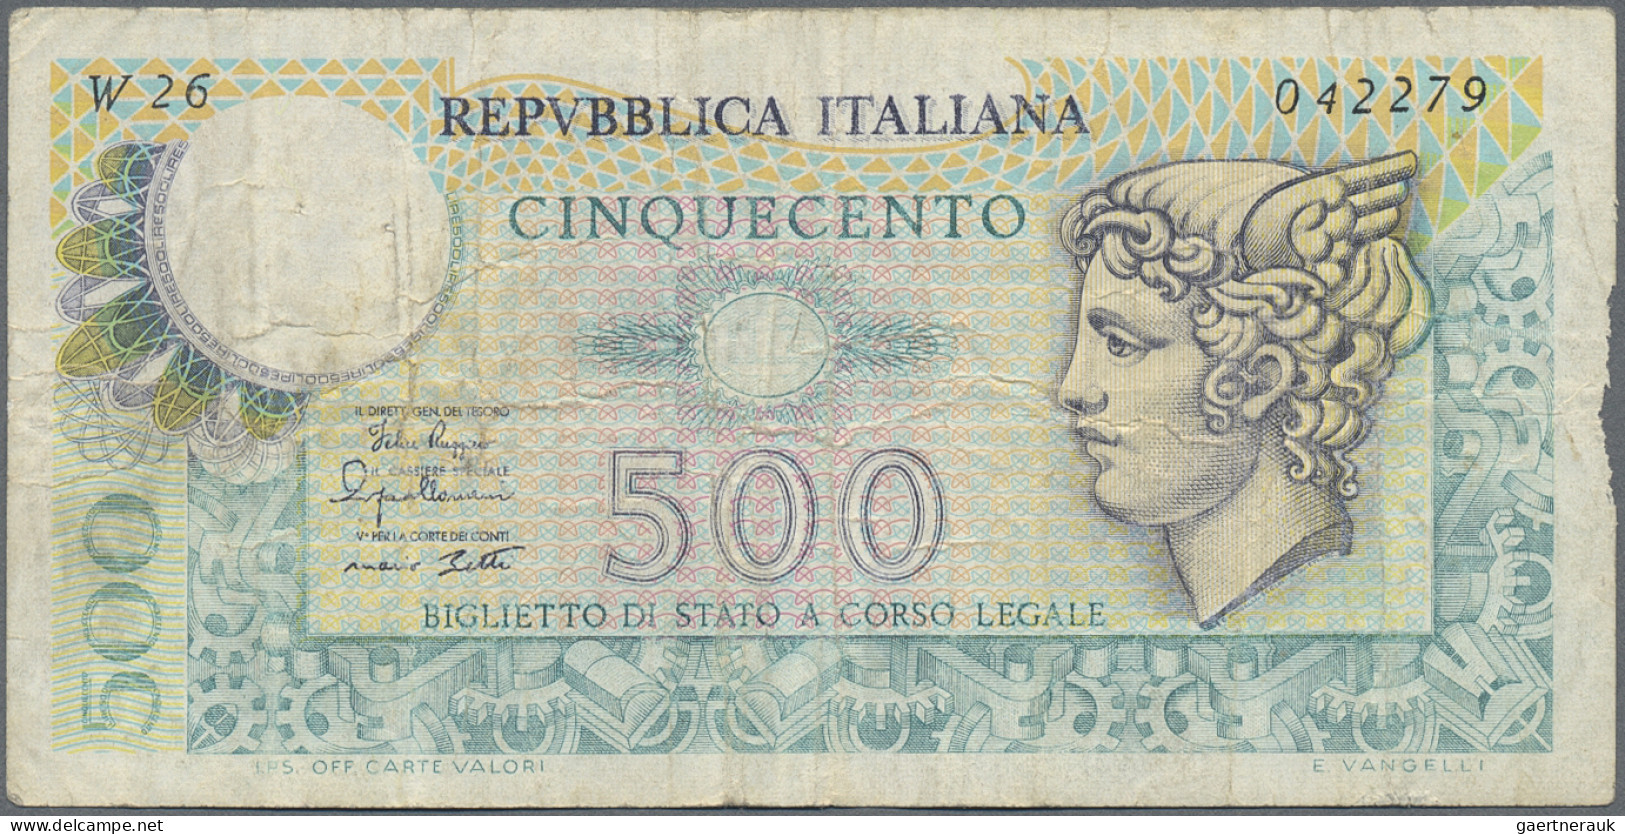 Italy: Regno d'Italia, State & Treasury Notes, lot with 25 banknotes, series 187